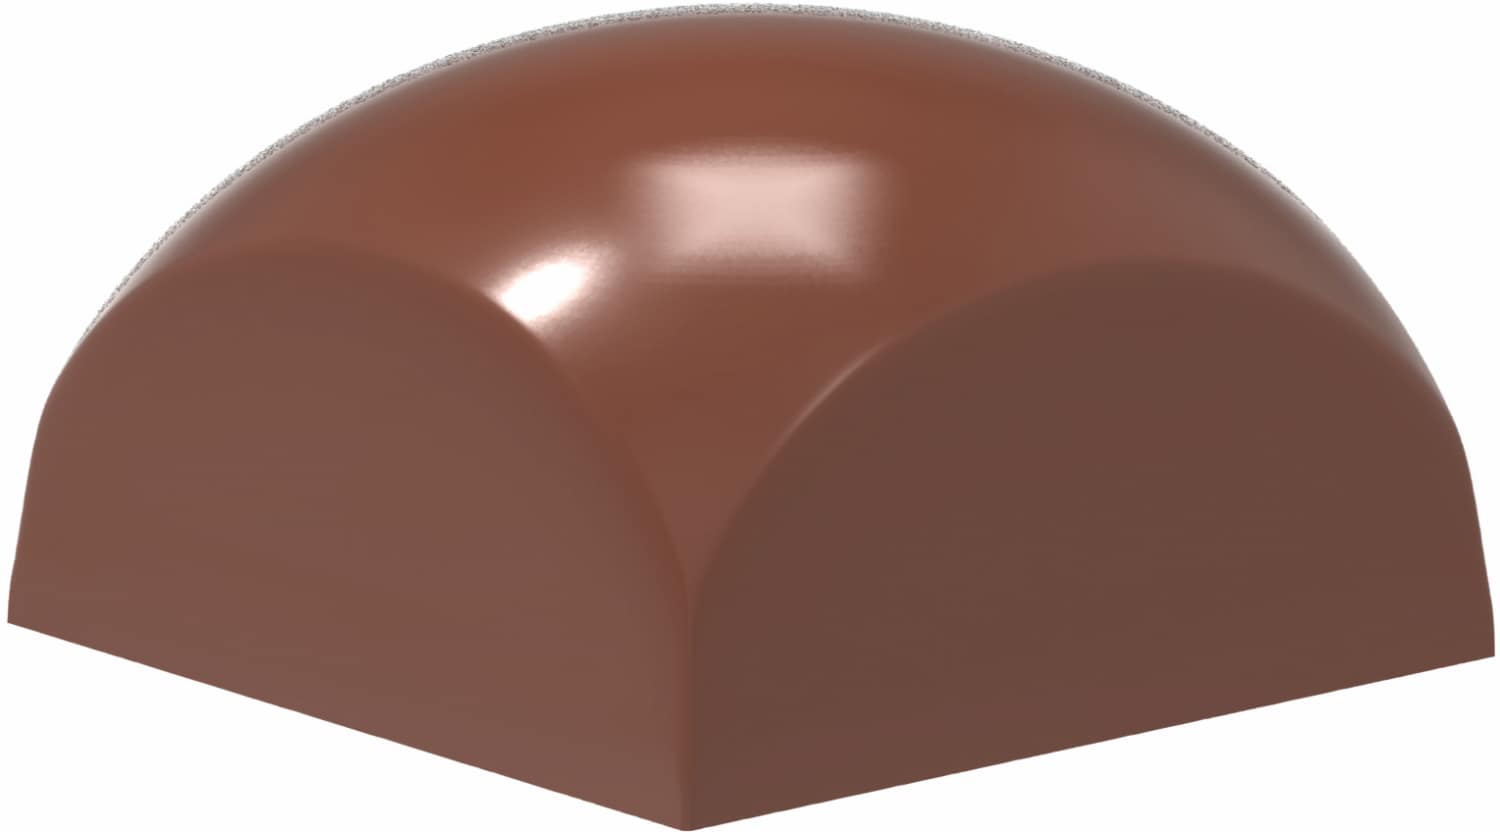 Chocolate mould "Biscuit" 421865